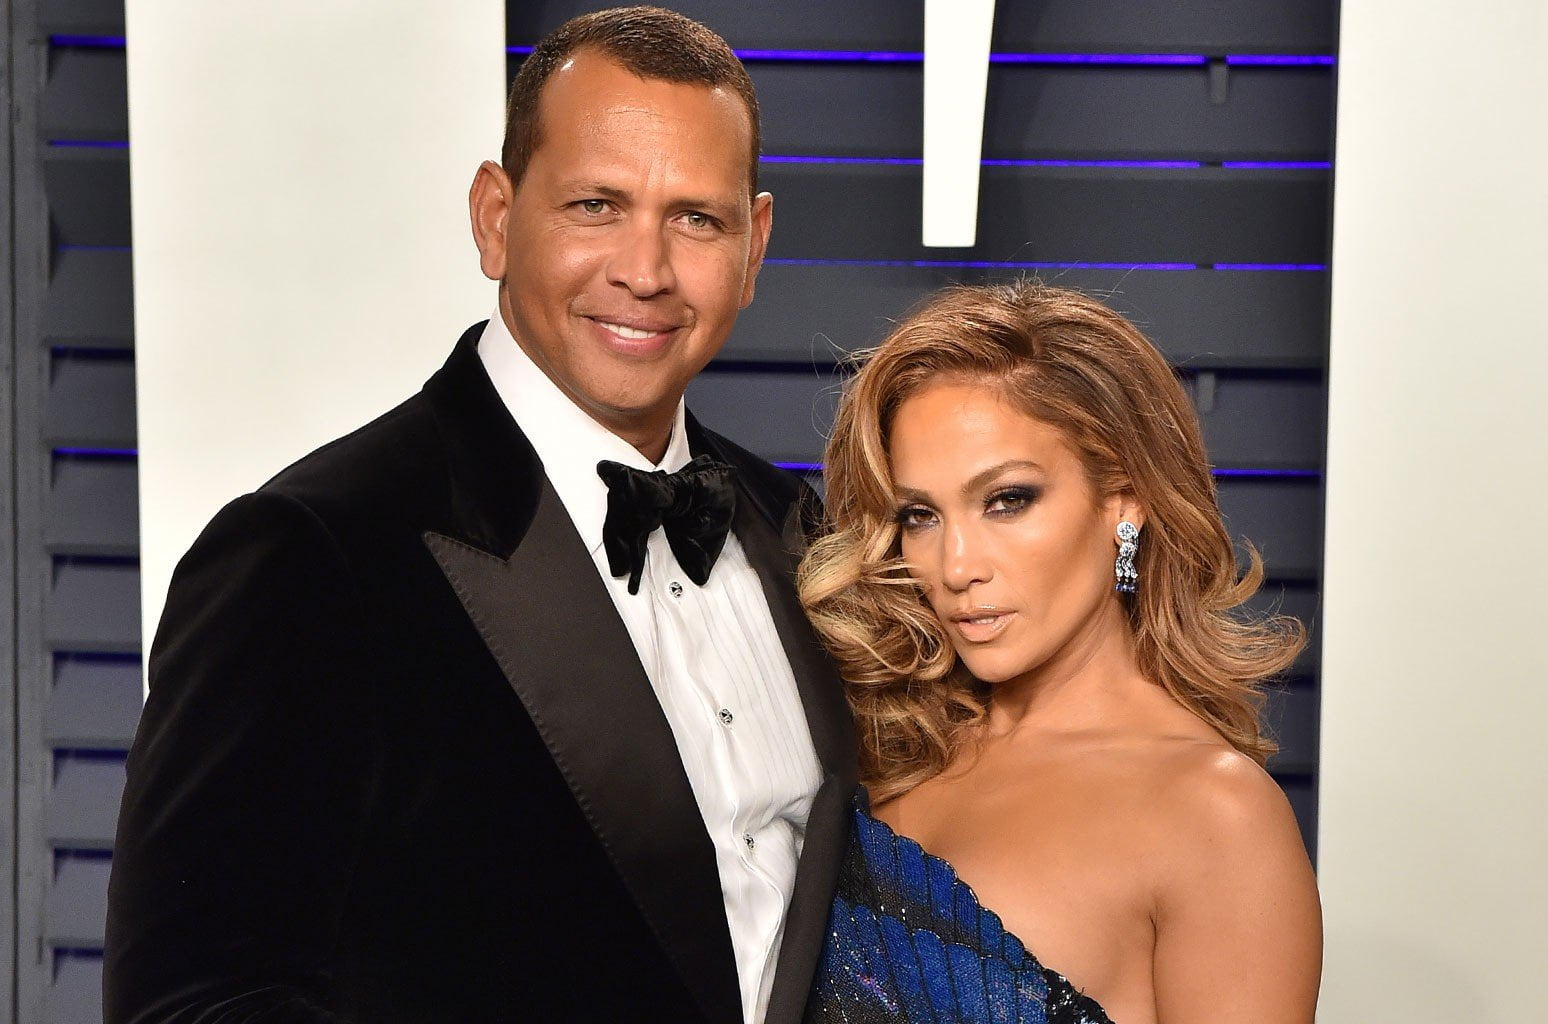 Alex Rodriguez Claims He And Jennifer Lopez Are Still Together After Breakup Reports!